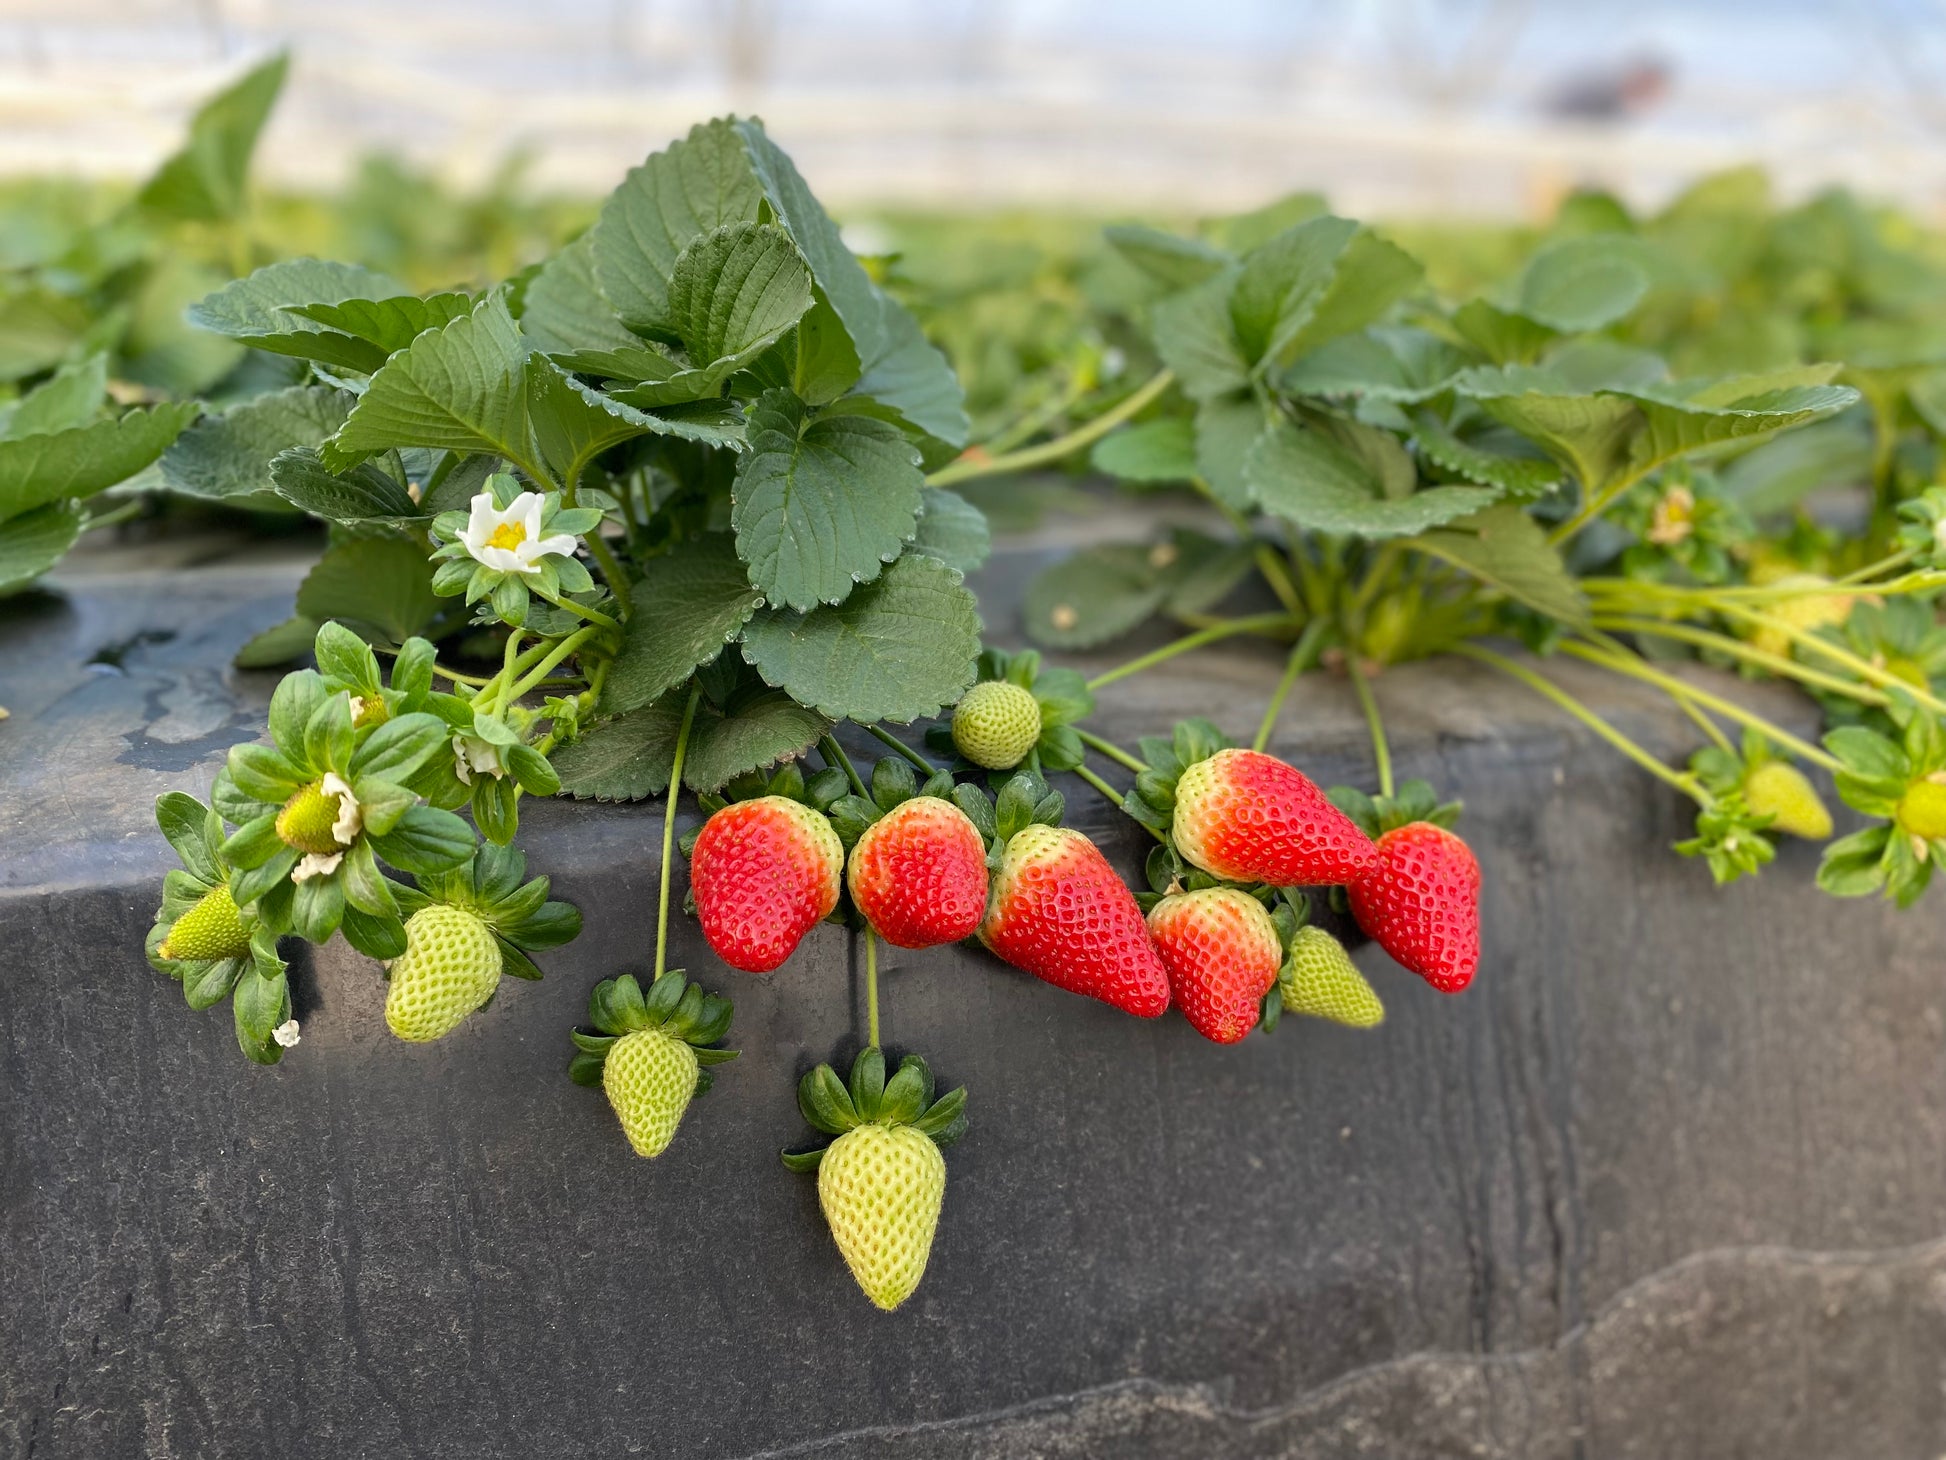 A well-developed strawberry plant with fruit of all stages including: ripe, unripe, and flowers.